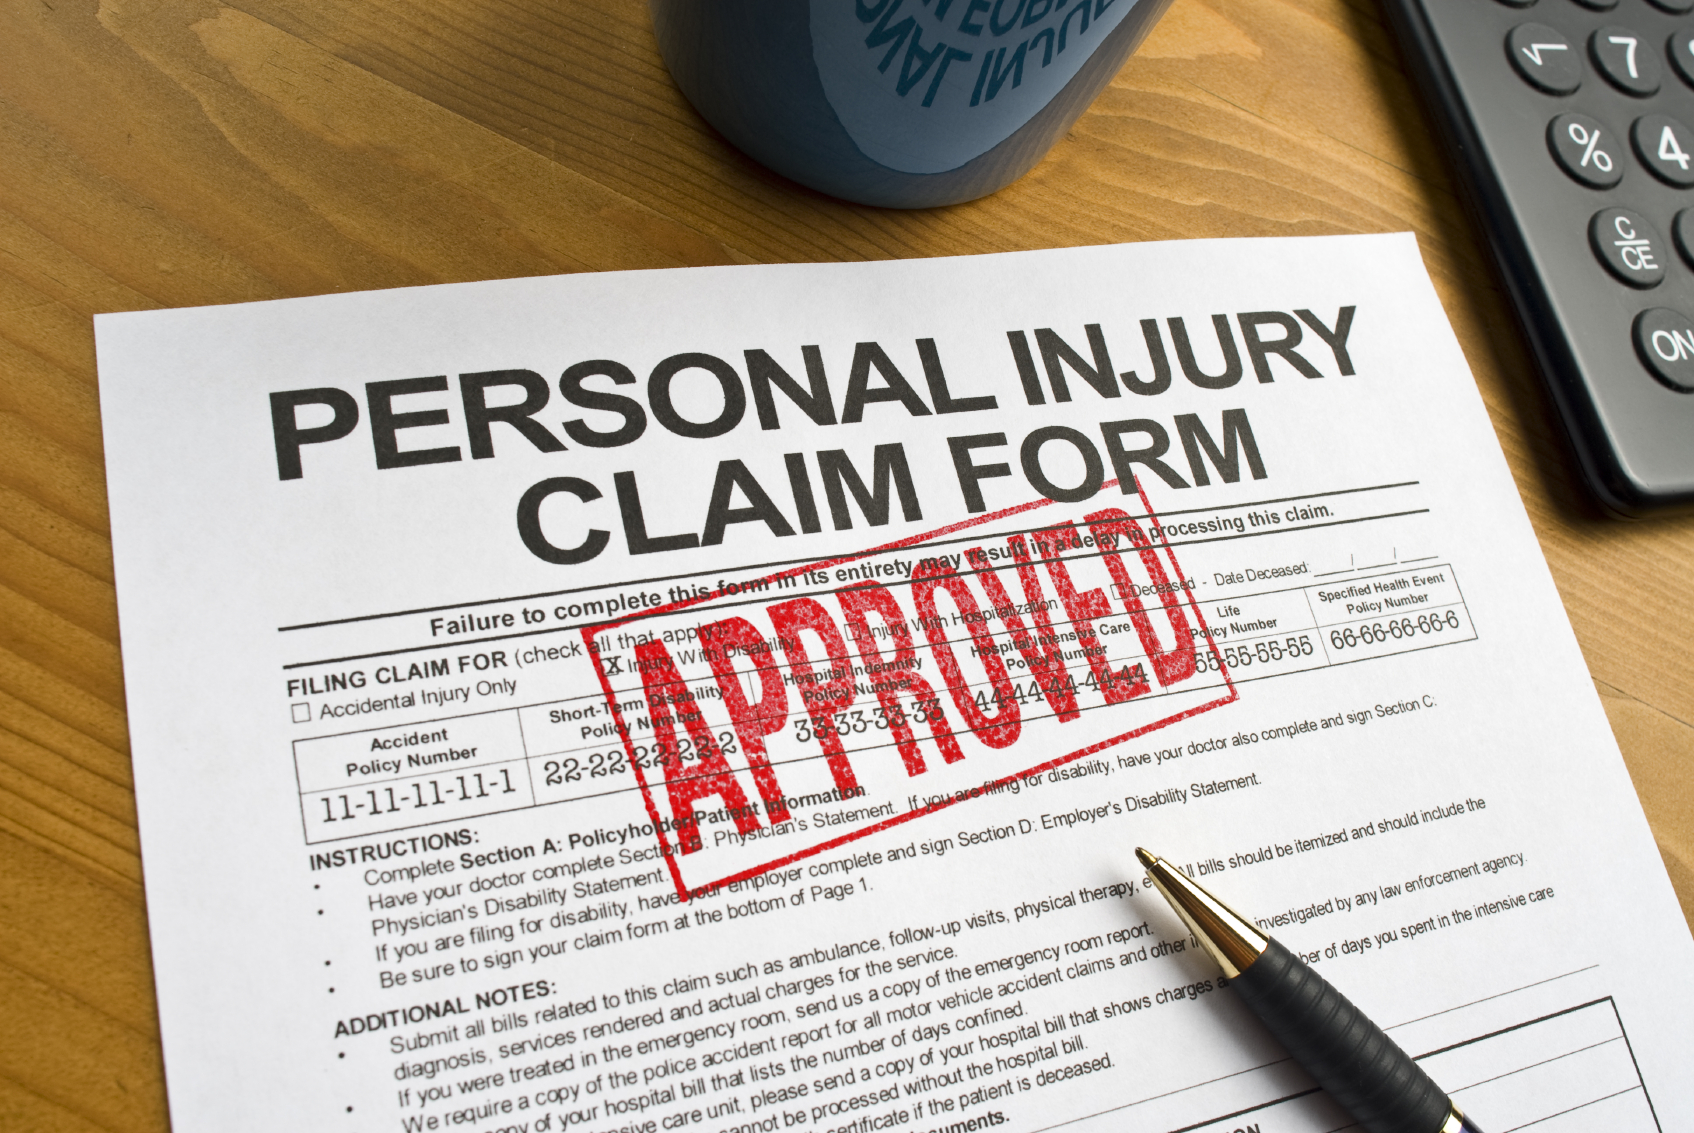 Insurance Defense Attorney and injury claim